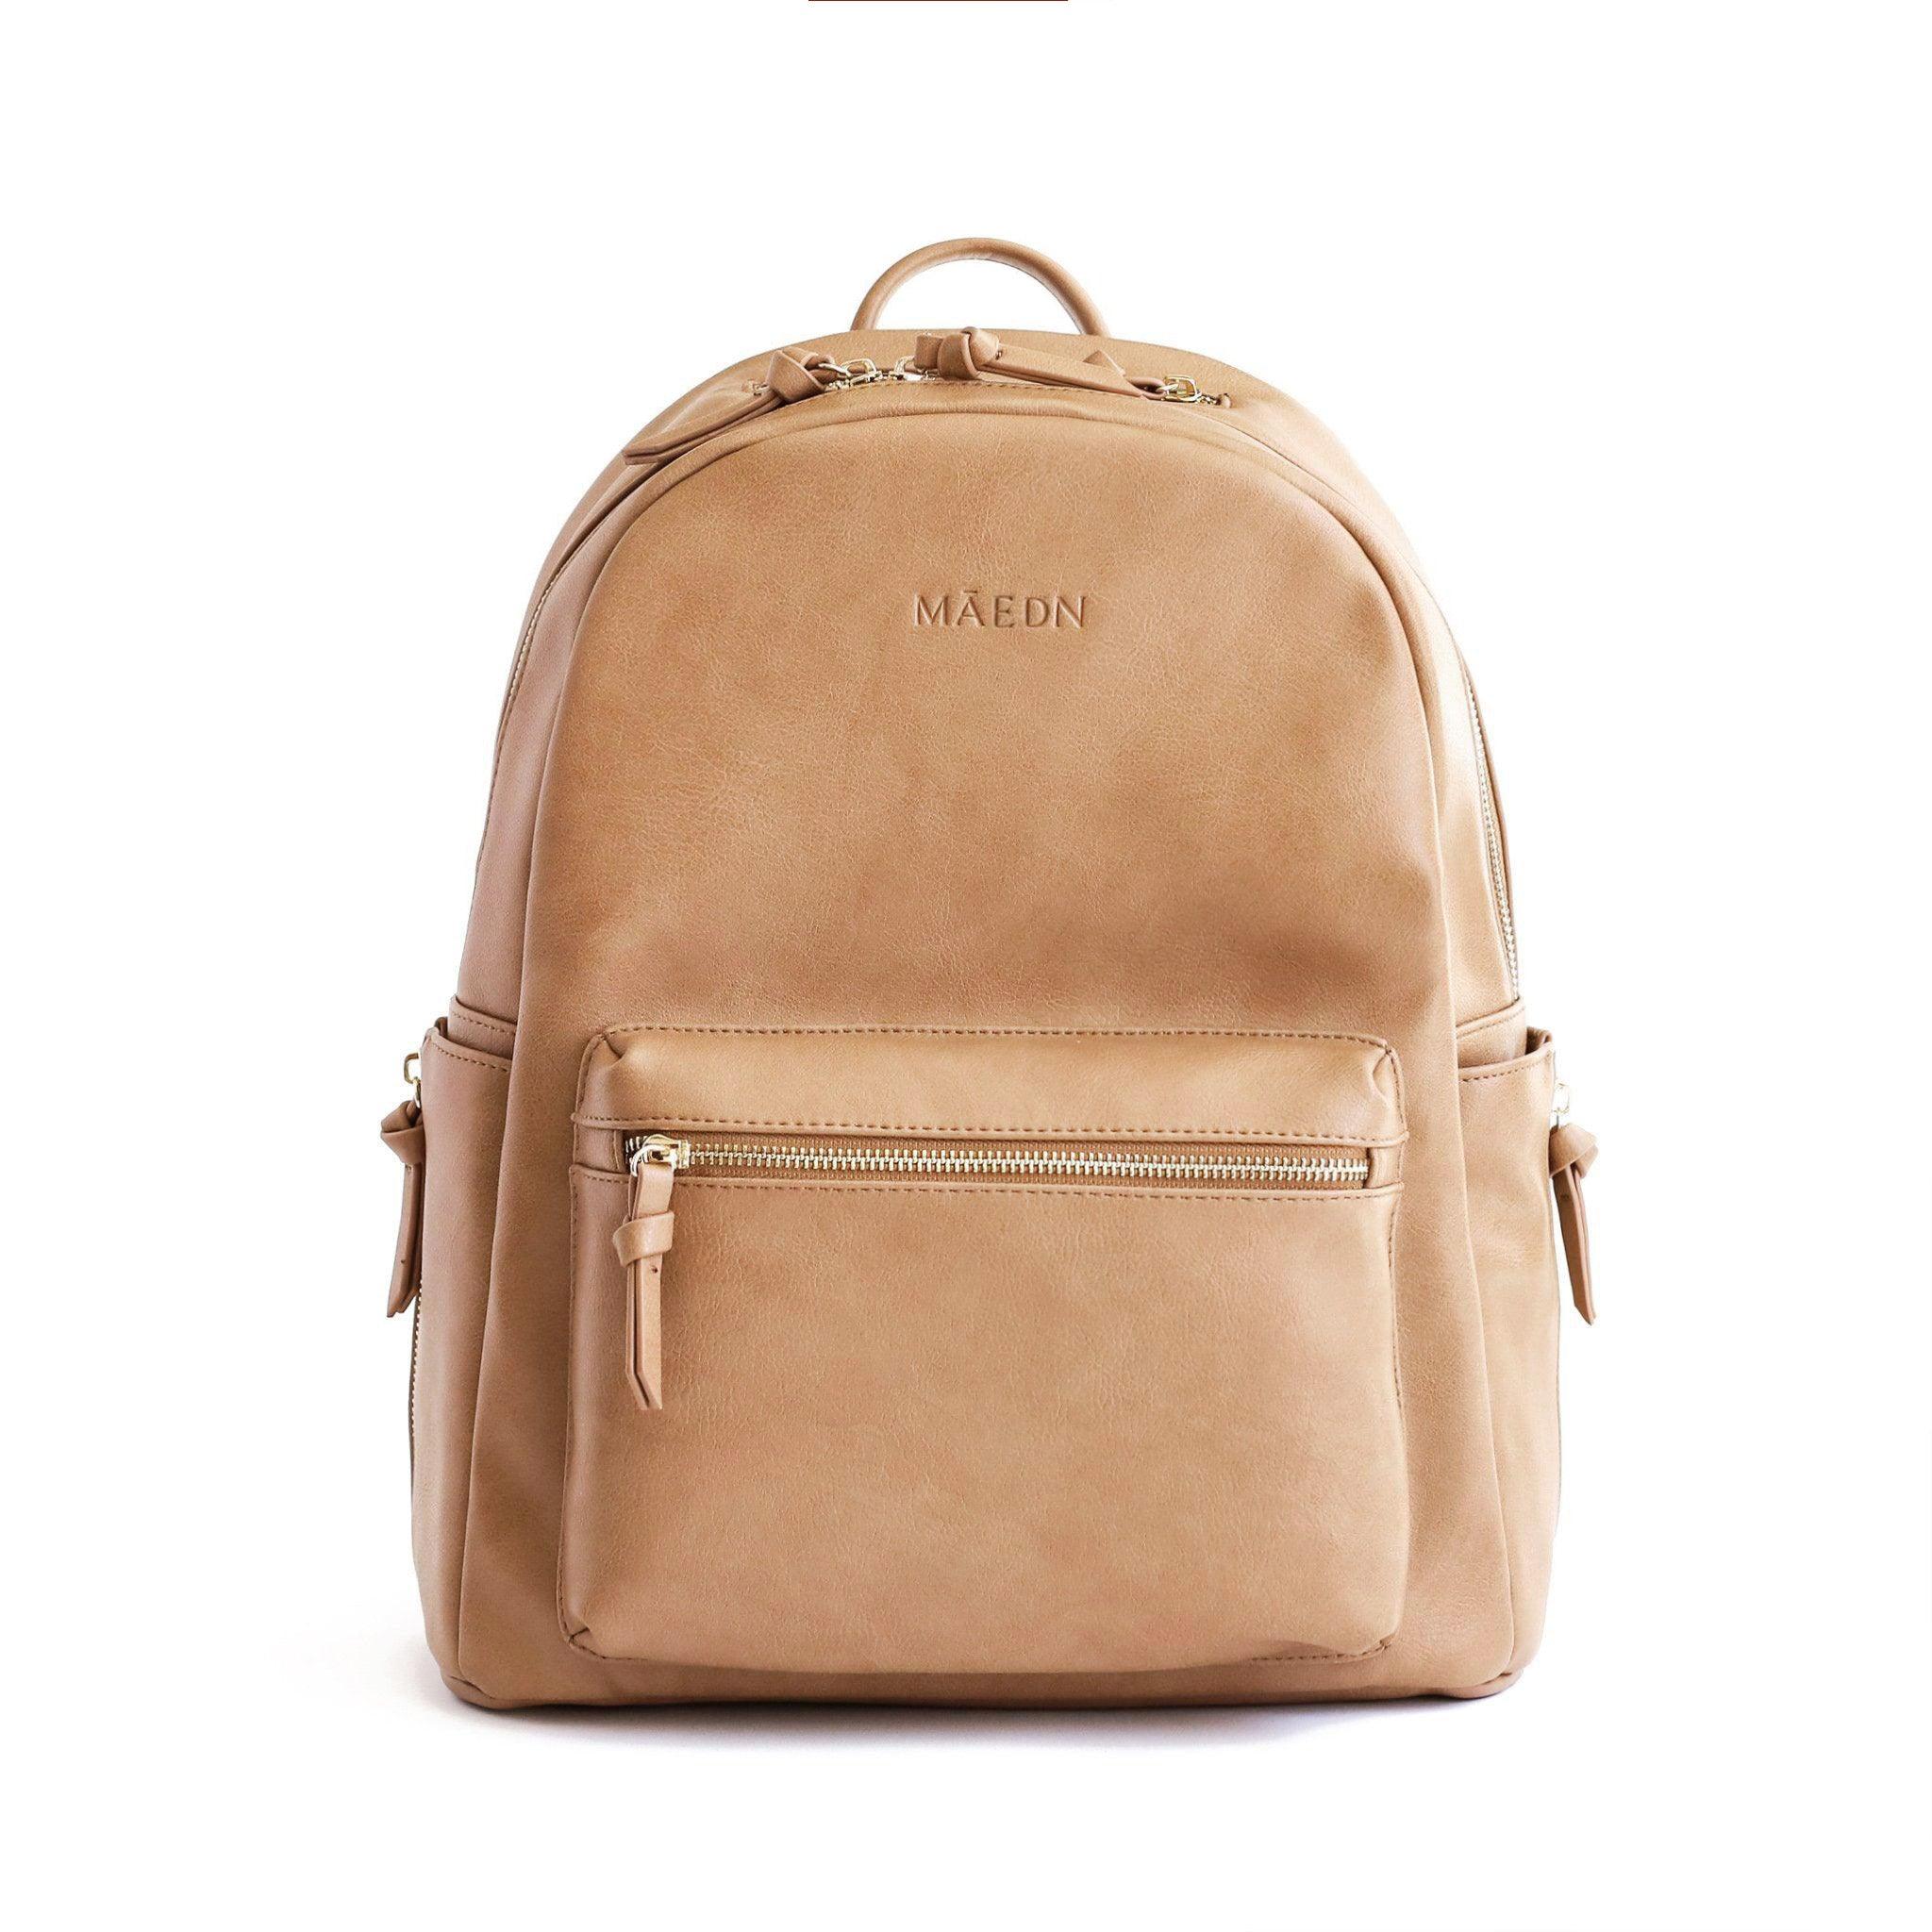 Buy PERKED Eclipse Backpack from made up of Leather for Men and Women in  Camel color at Amazon.in